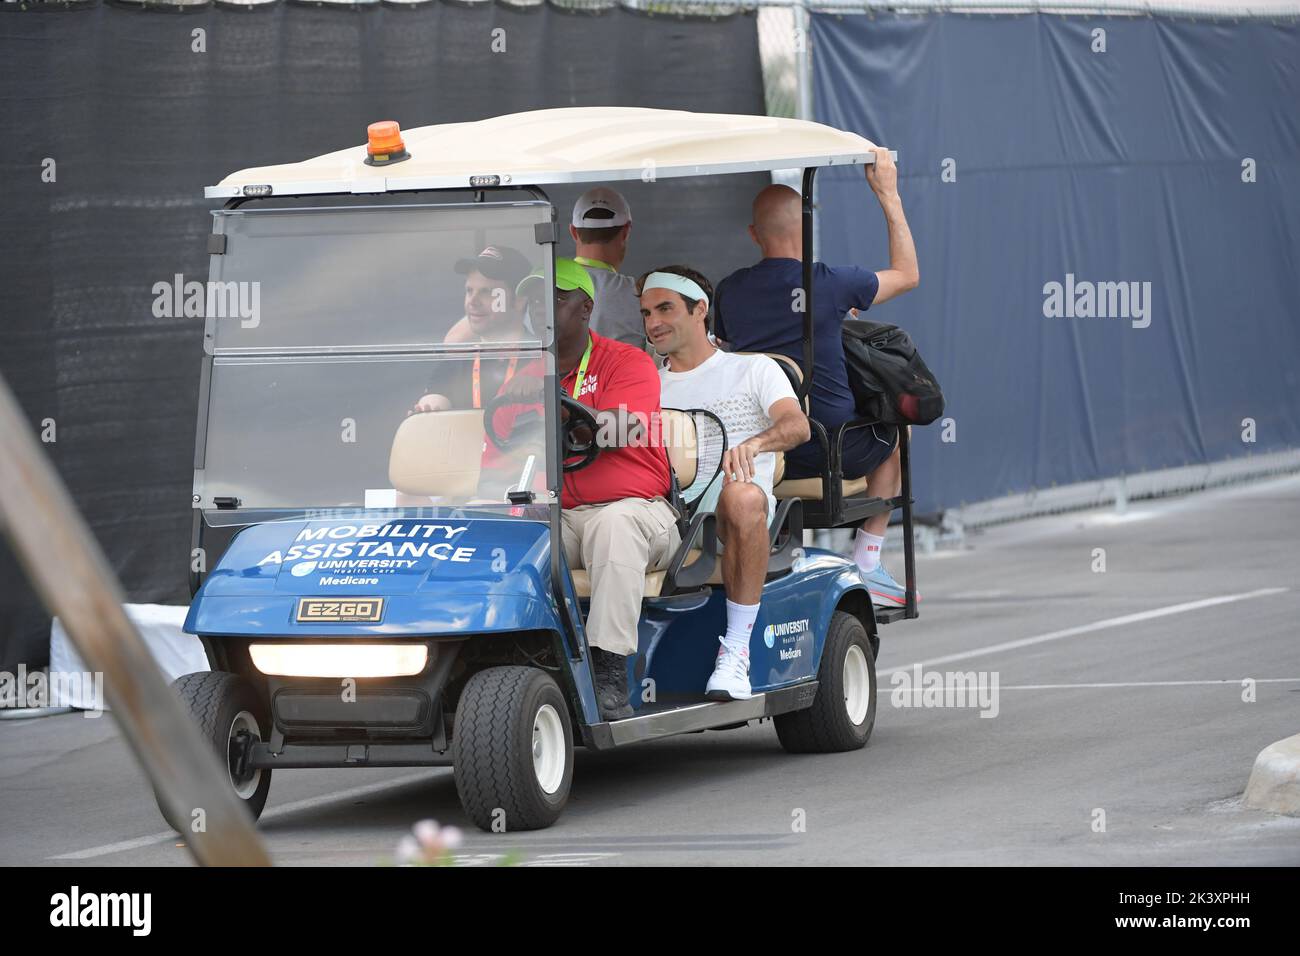 MIAMI GARDENS, FLORIDA - MARCH 26: (EXCLUSIVE COVERAGE) Roger Federer arrives on a golf cart for practice court day 9 of the Miami Open presented by Itau at Hard Rock Stadium on March 26, 2019 in Miami Gardens, Florida People: Roger Federer Credit: Storms Media Group/Alamy Live News Stock Photo